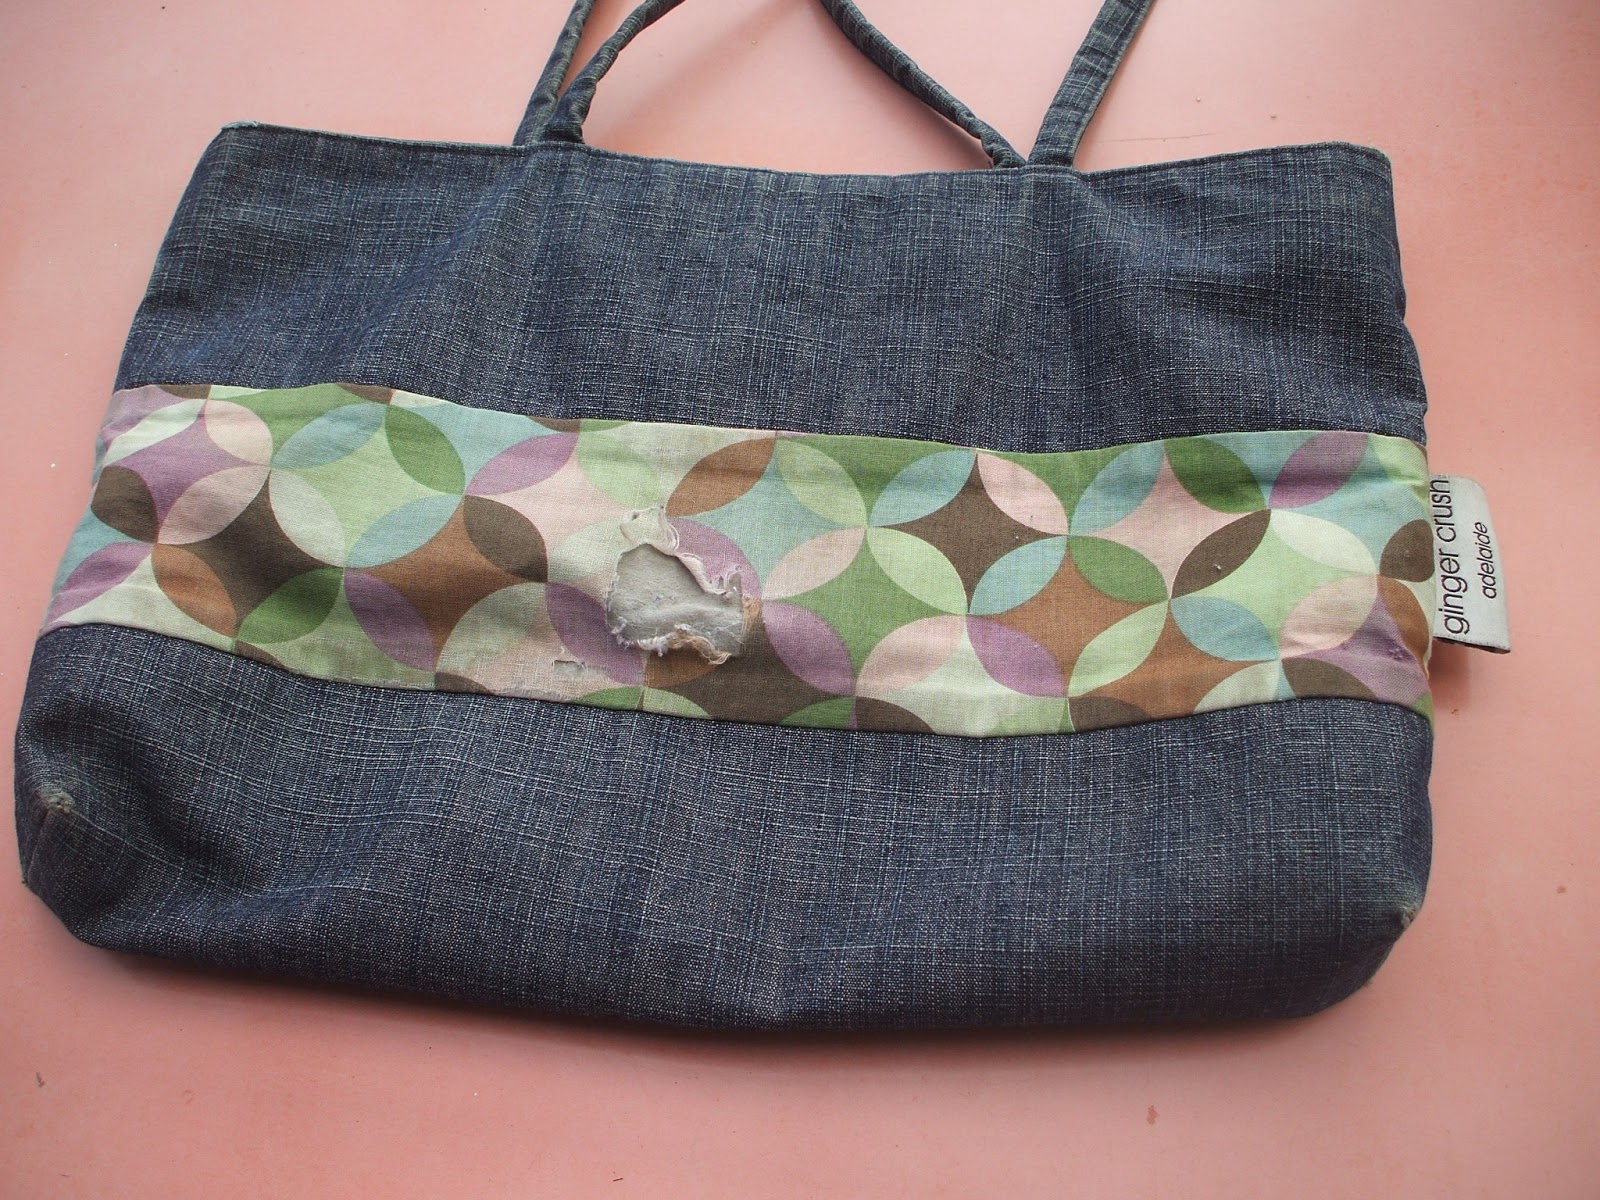 Recycled,Repurposed,Renewed.: The Charlotte No! Bag.